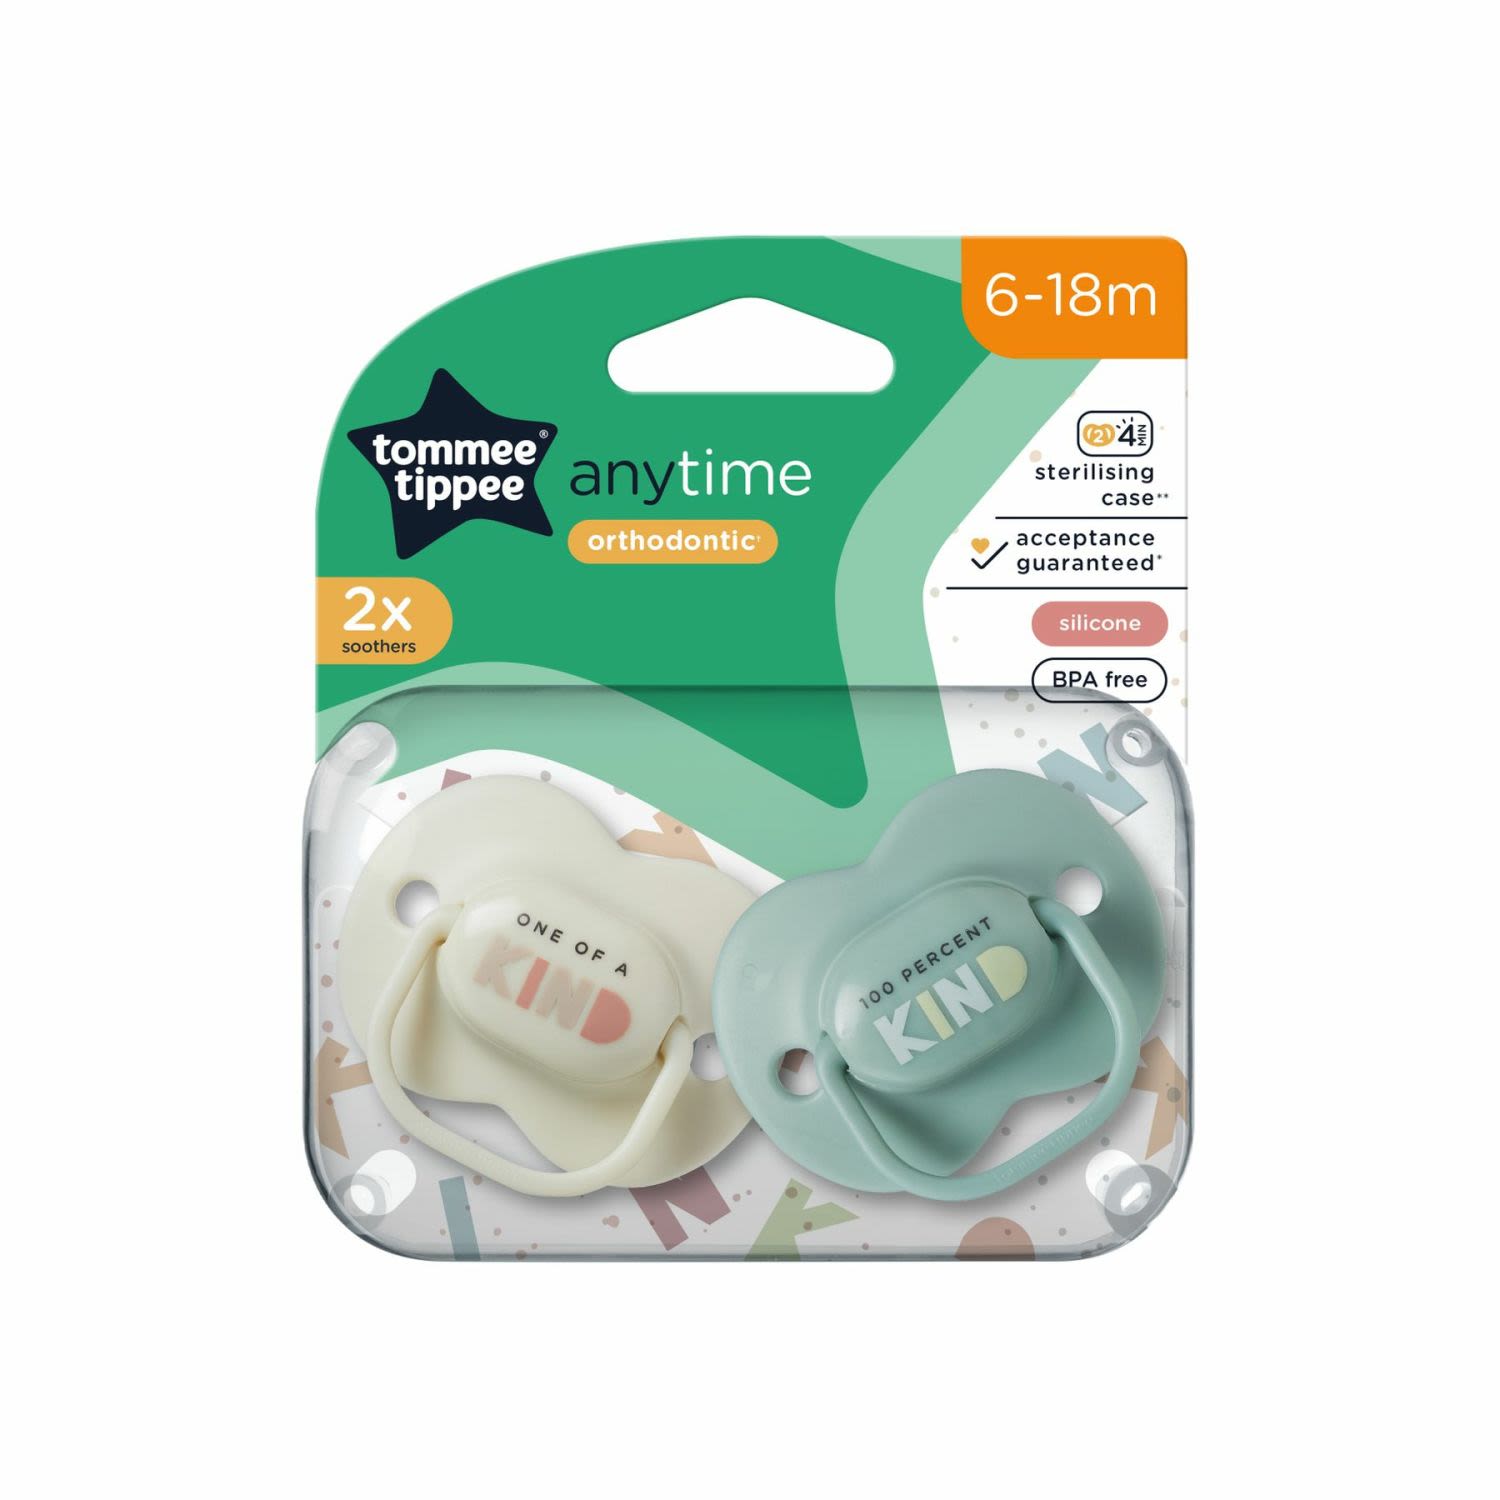 Tommee Tippee 2x Orthodontic 6-18m Any Time Soothers, 2 Each